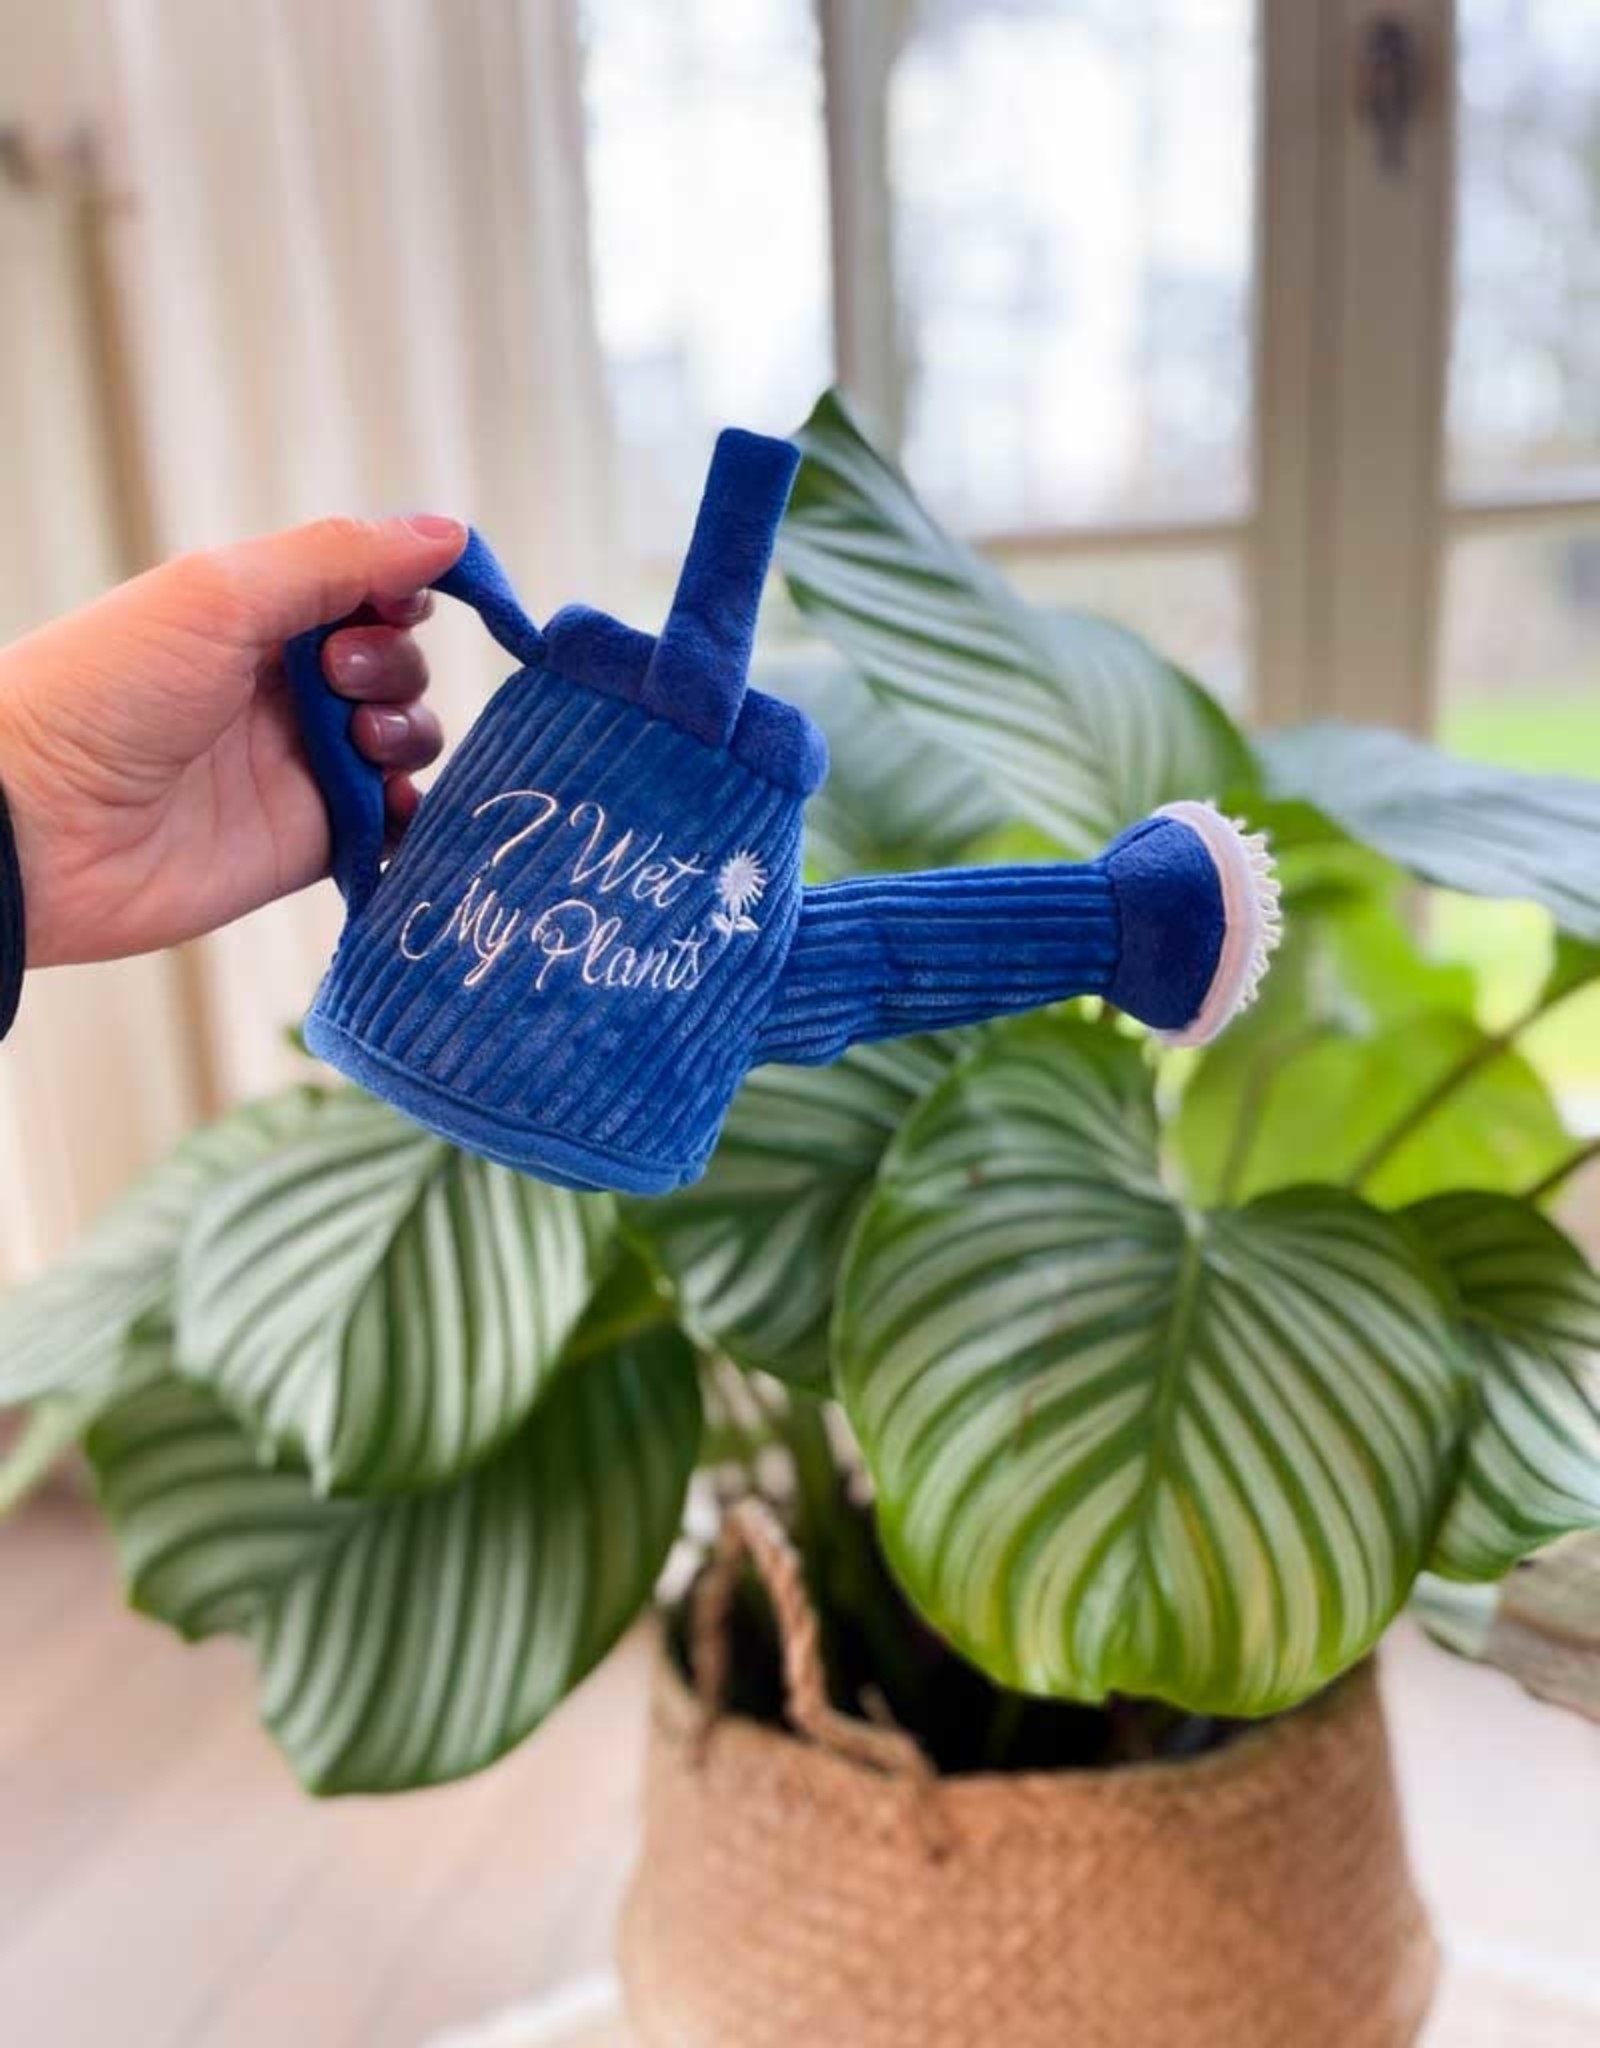 P.L.A.Y. Handy Dandy Watering Can | P.L.A.Y. Blooming Buddies